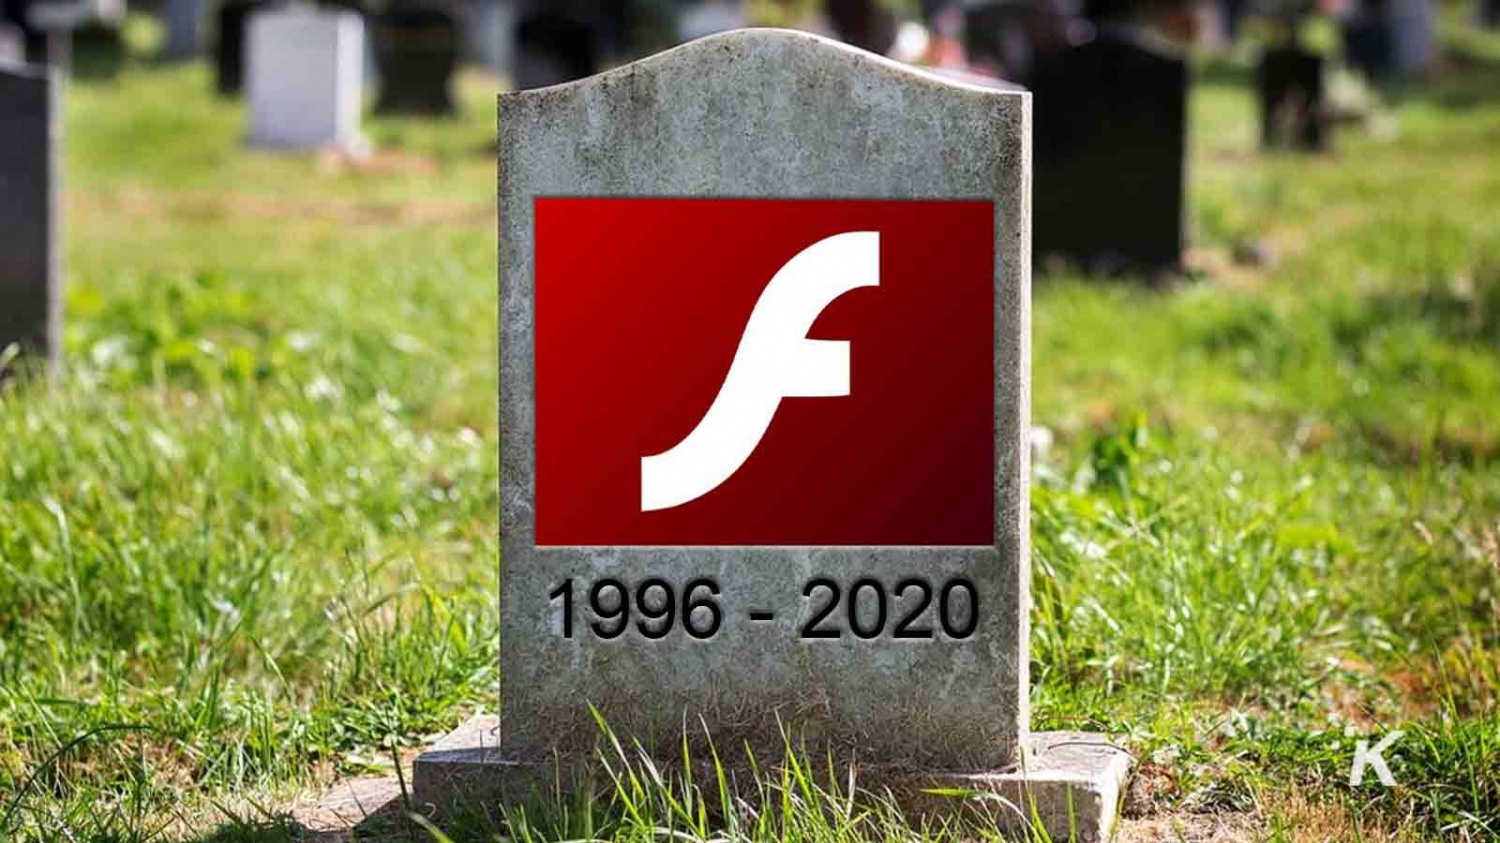 adobe flash player replacement for windows 10